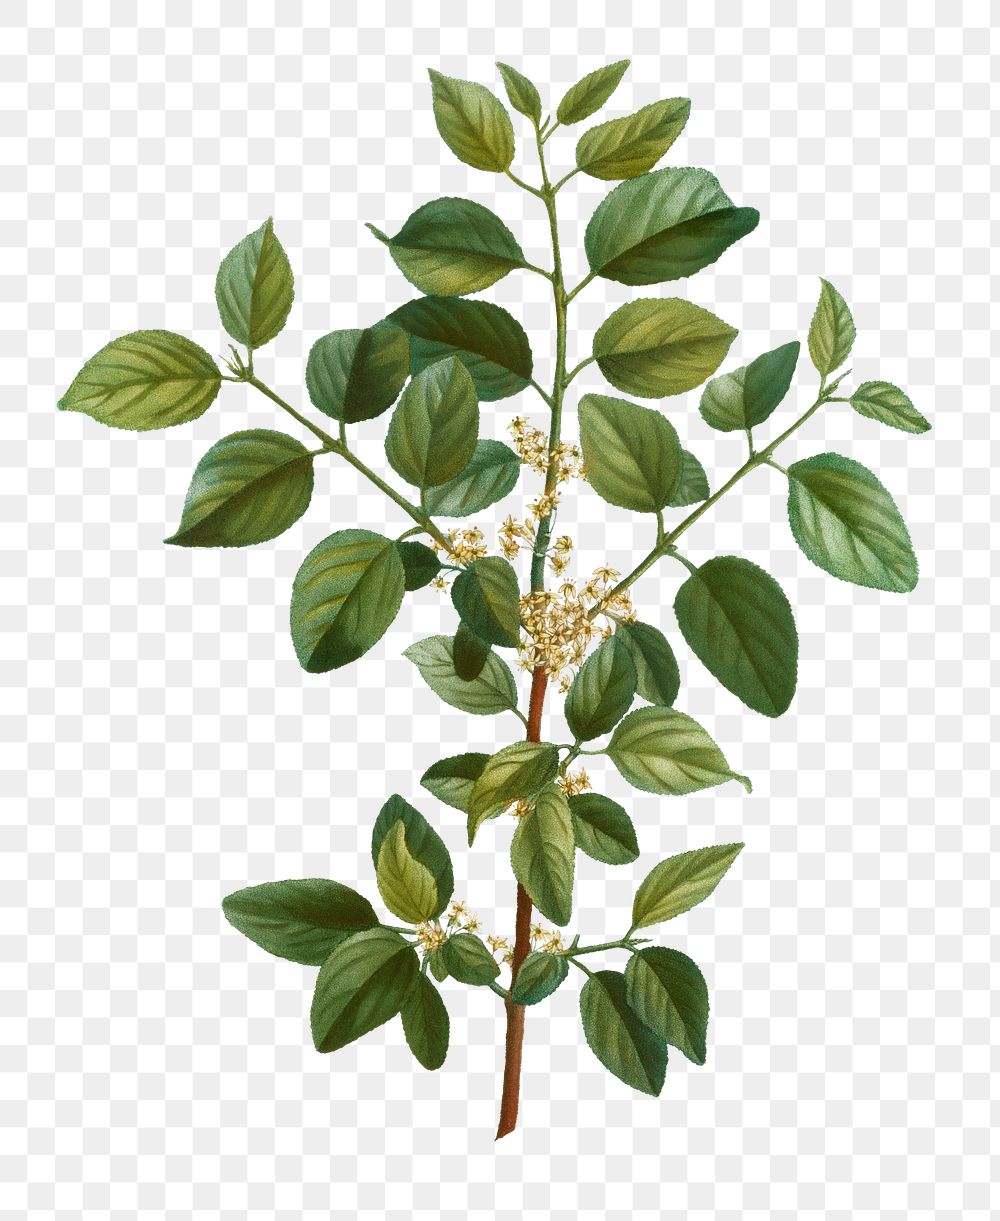 Common buckthorn branch plant transparent png